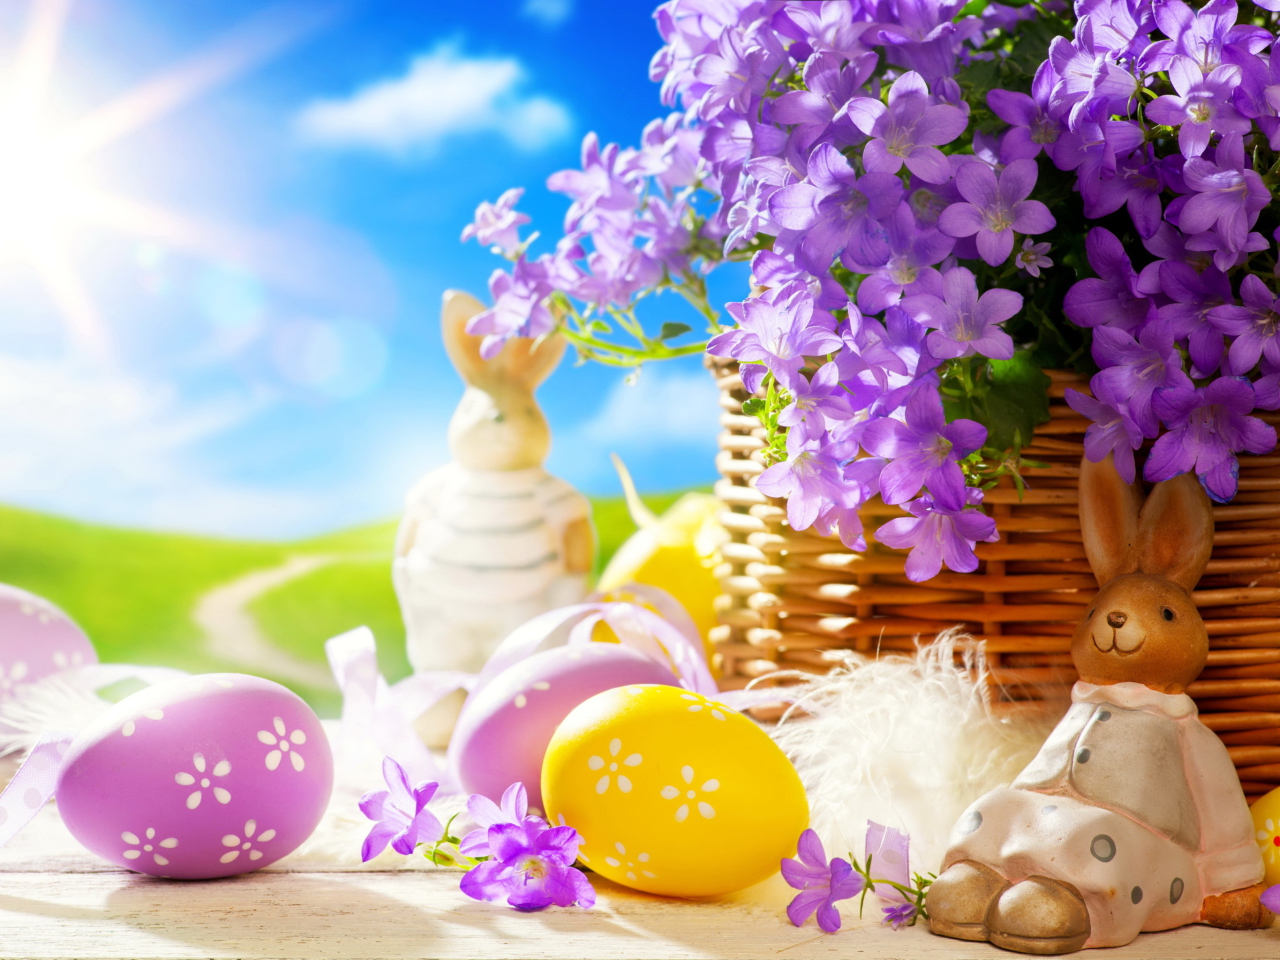 Easter Rabbit And Purple Flowers wallpaper 1280x960